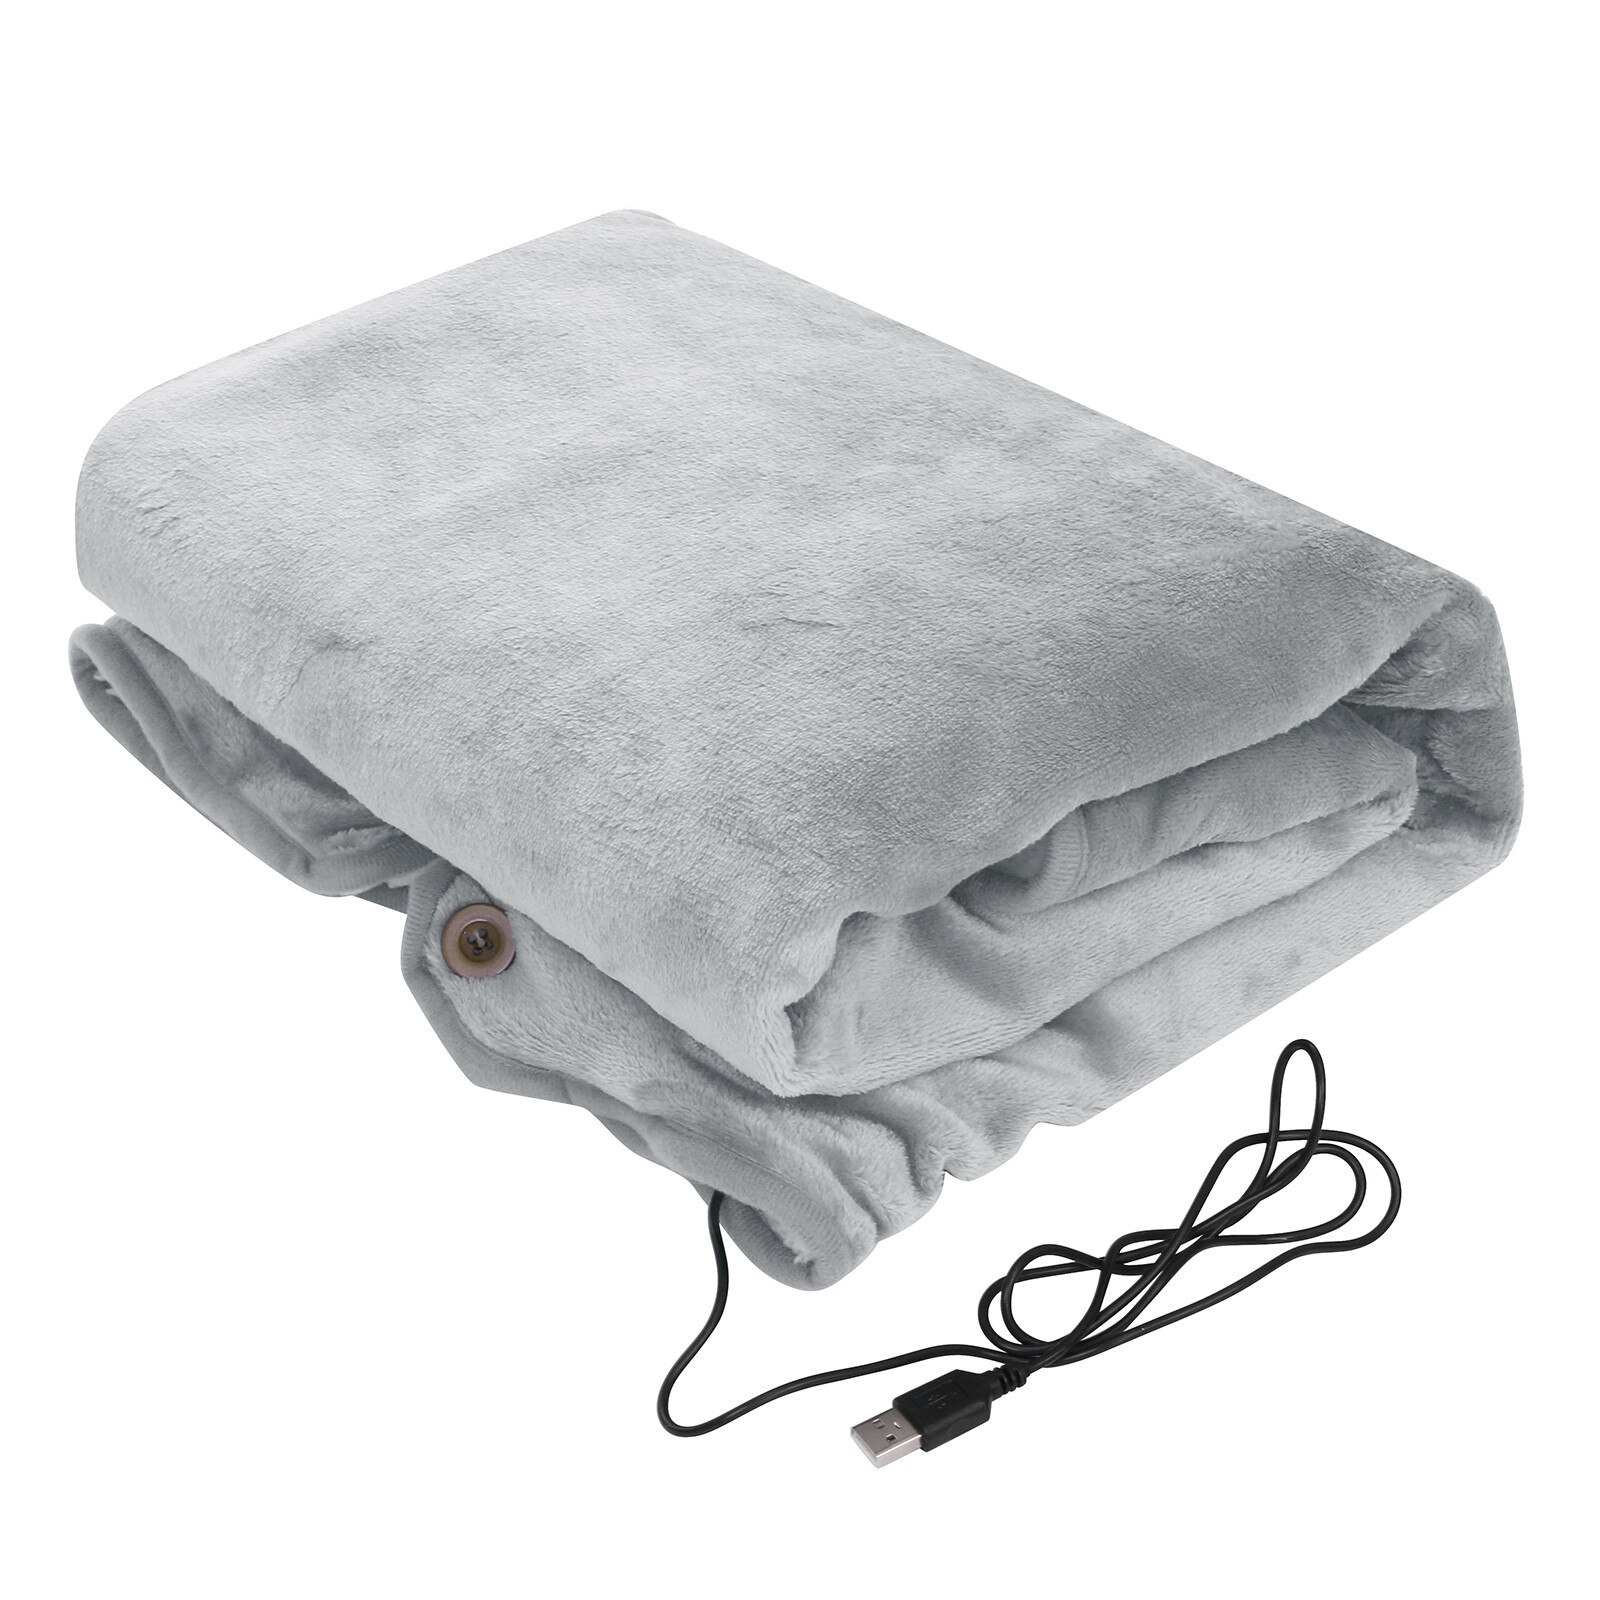 Usb Heated Warm Blanket Soft Electric Blanket For Couch Heated Blanket Electric Throw Warming Shawl Lap Blankets For Home Office